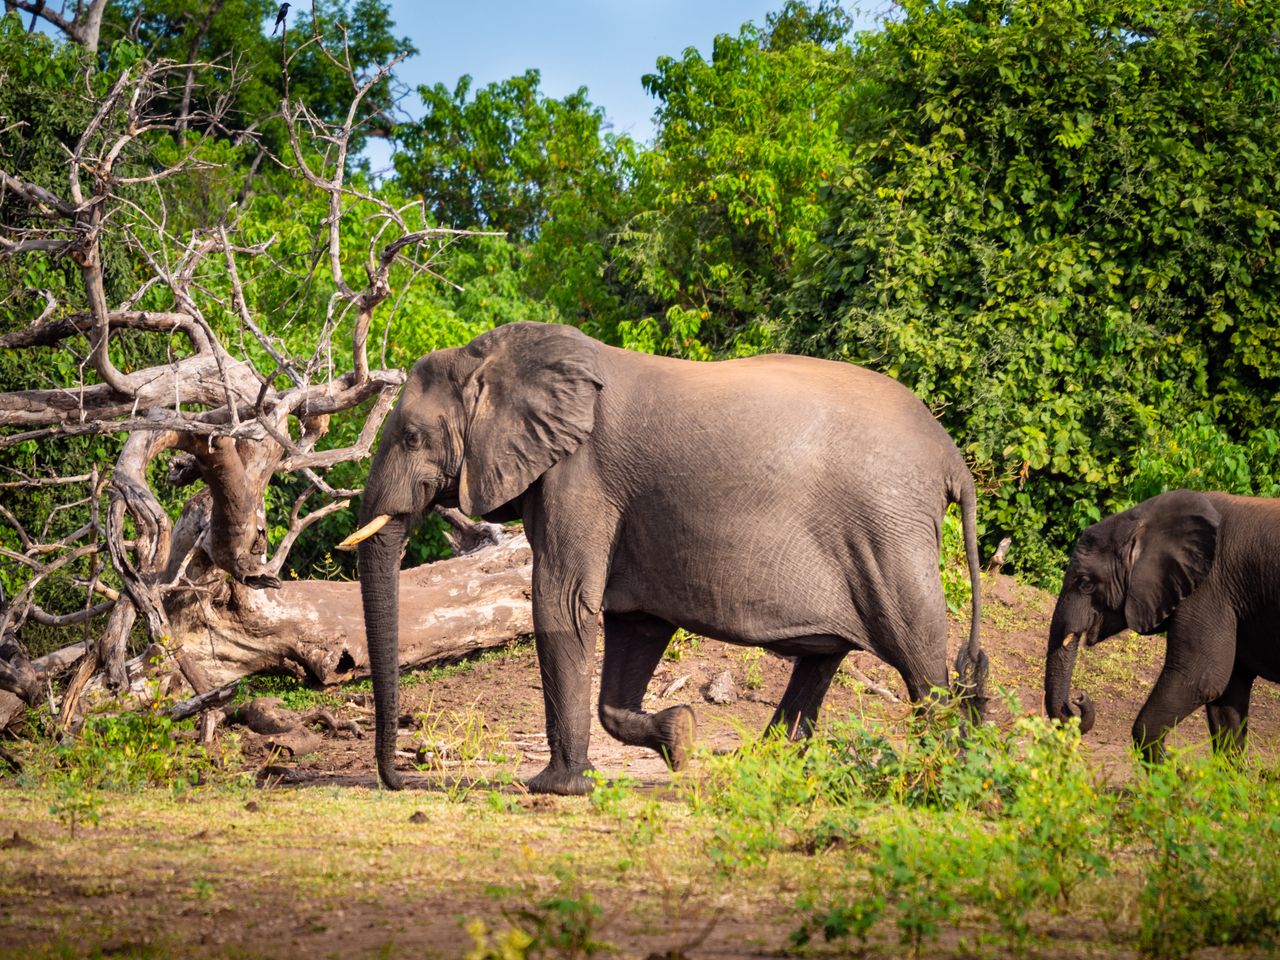 Elephants pose a problem for many African villages. The animal population is in some places so large that it destroys crops and demolishes villages.